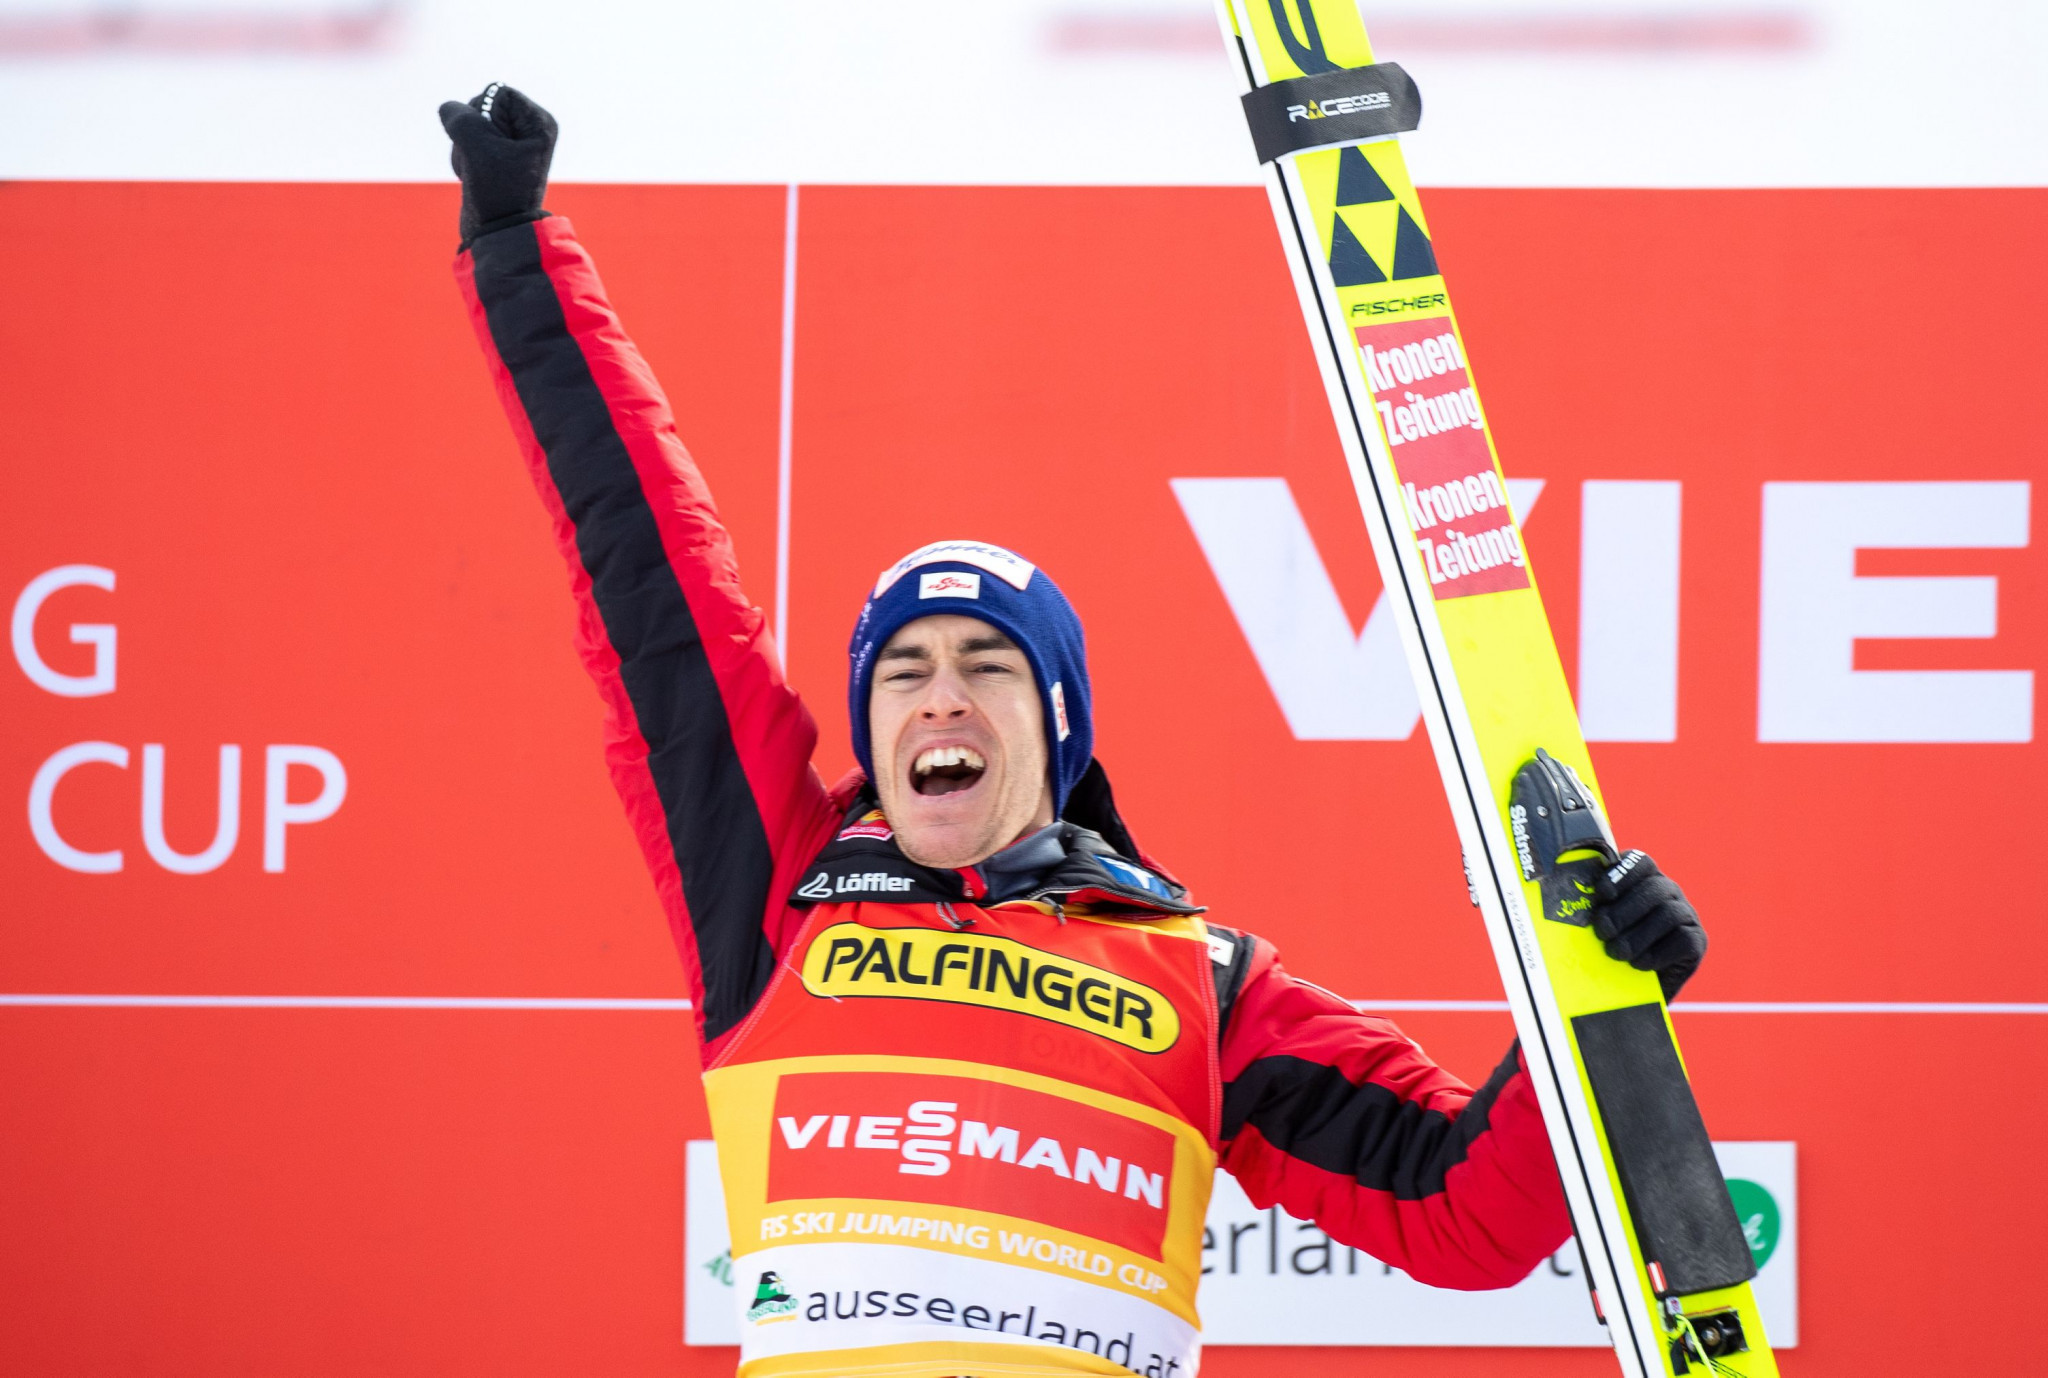 Stefan Kraft won his 20th FIS Ski Jumping World Cup event ©Getty Images